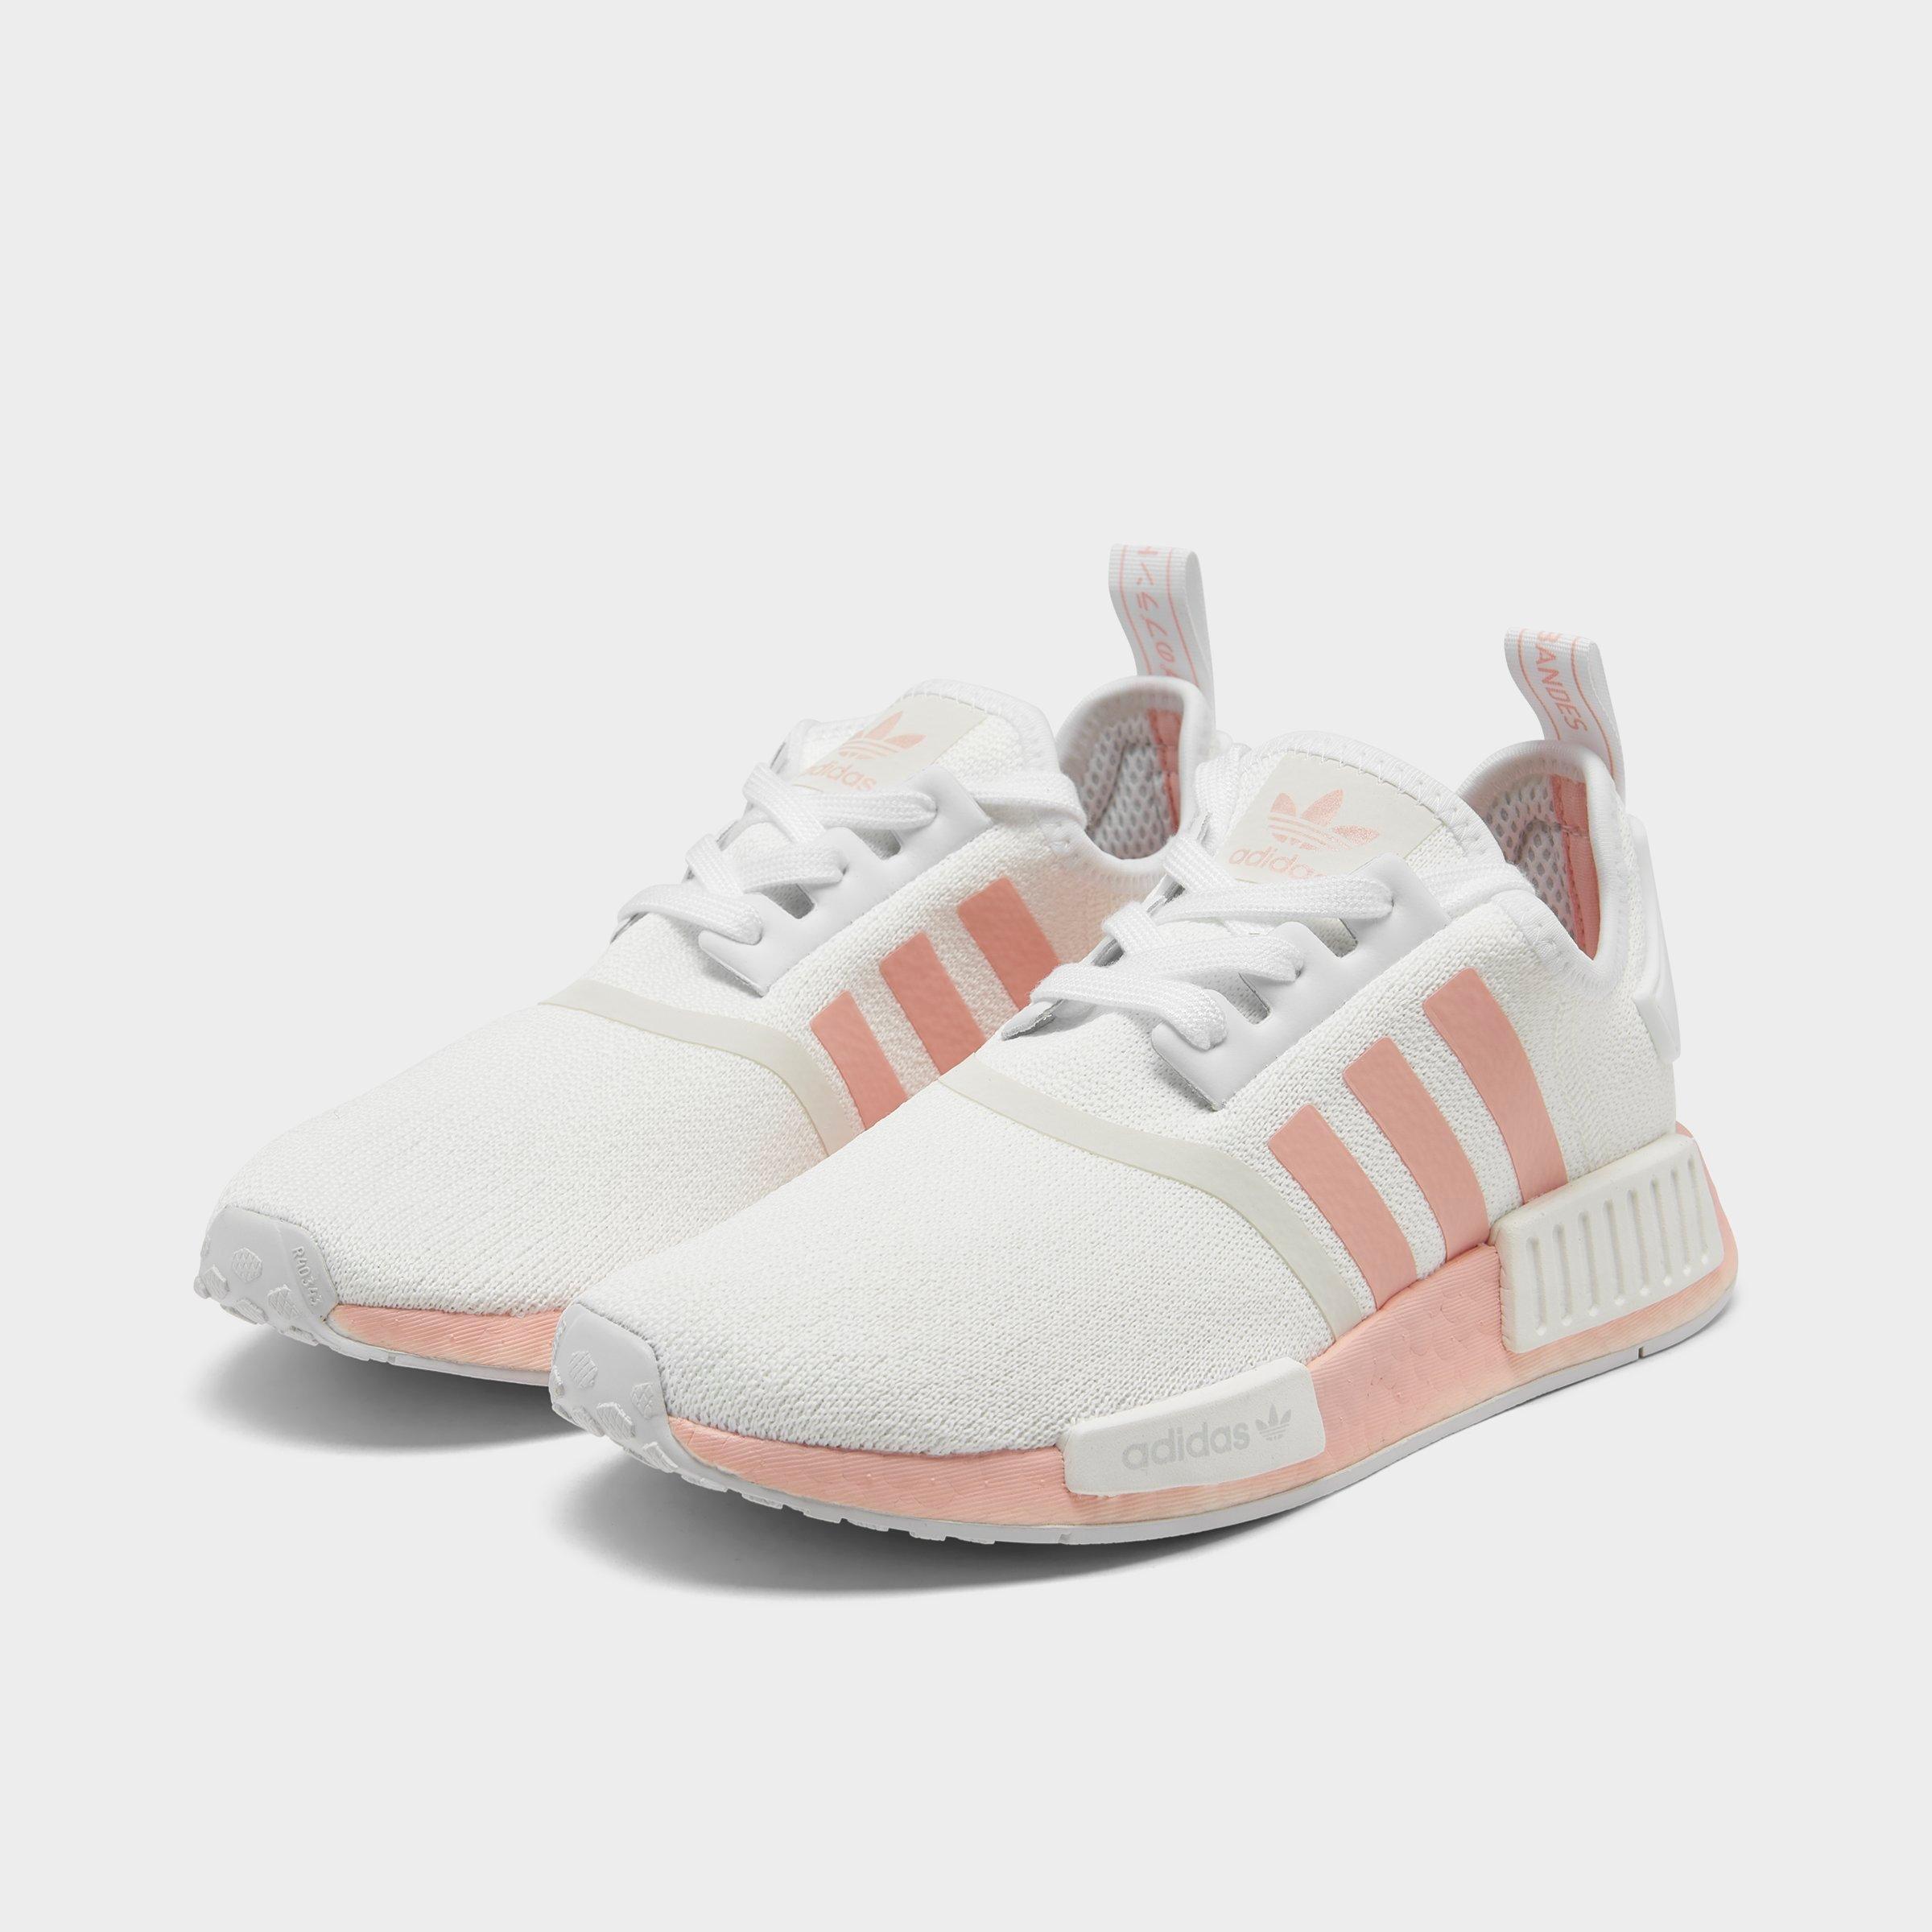 nmd r1 white vapour pink